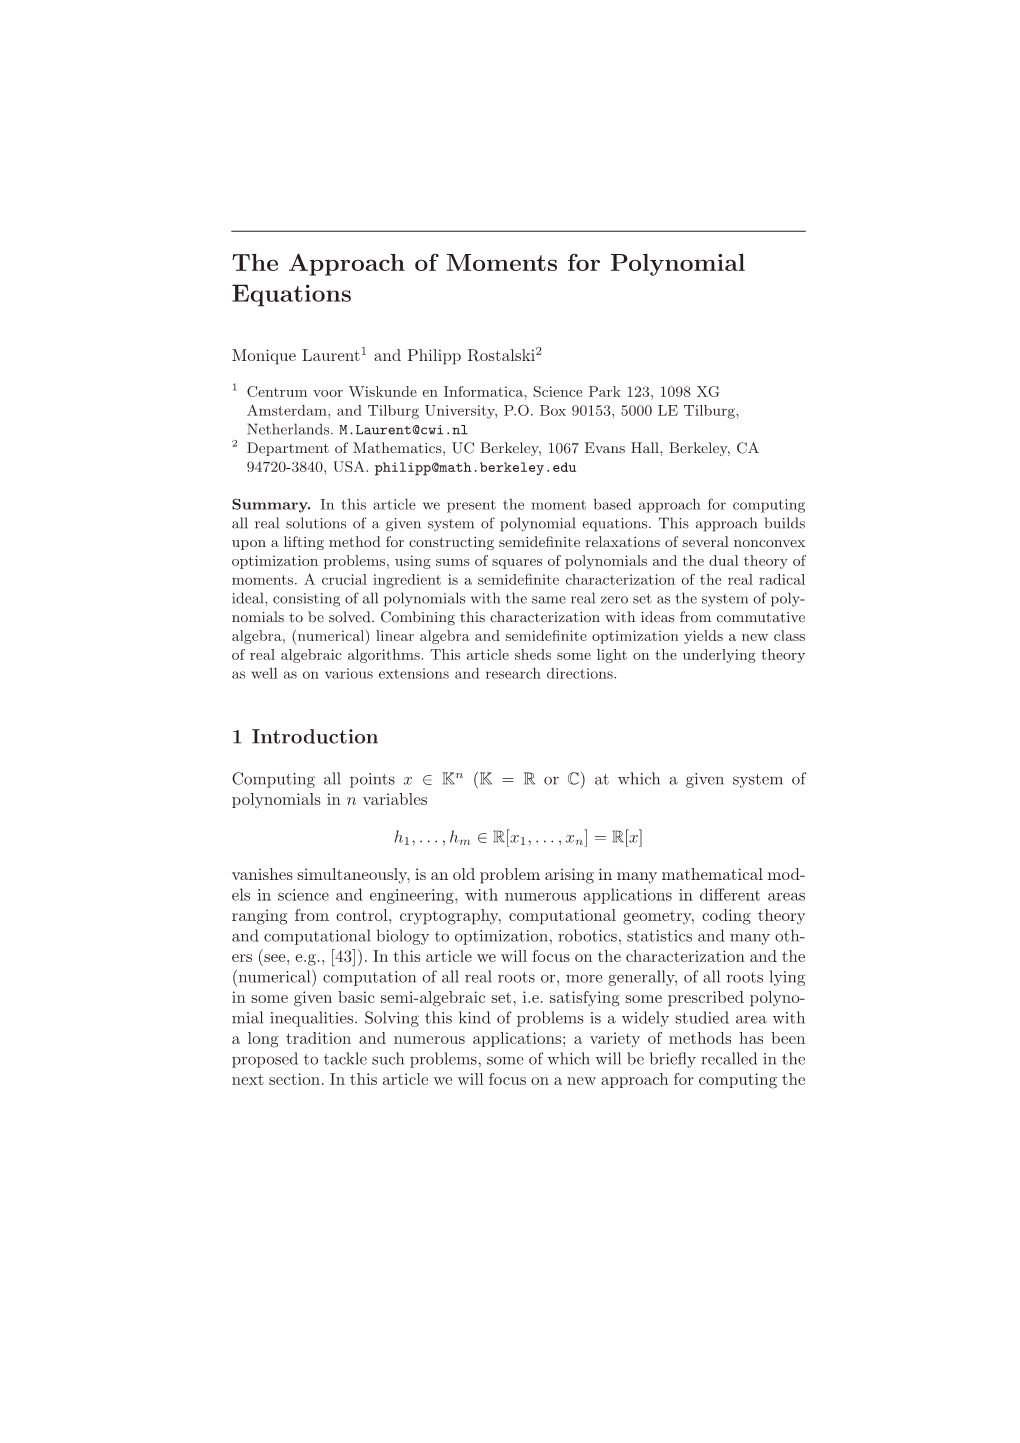 The Approach of Moments for Polynomial Equations